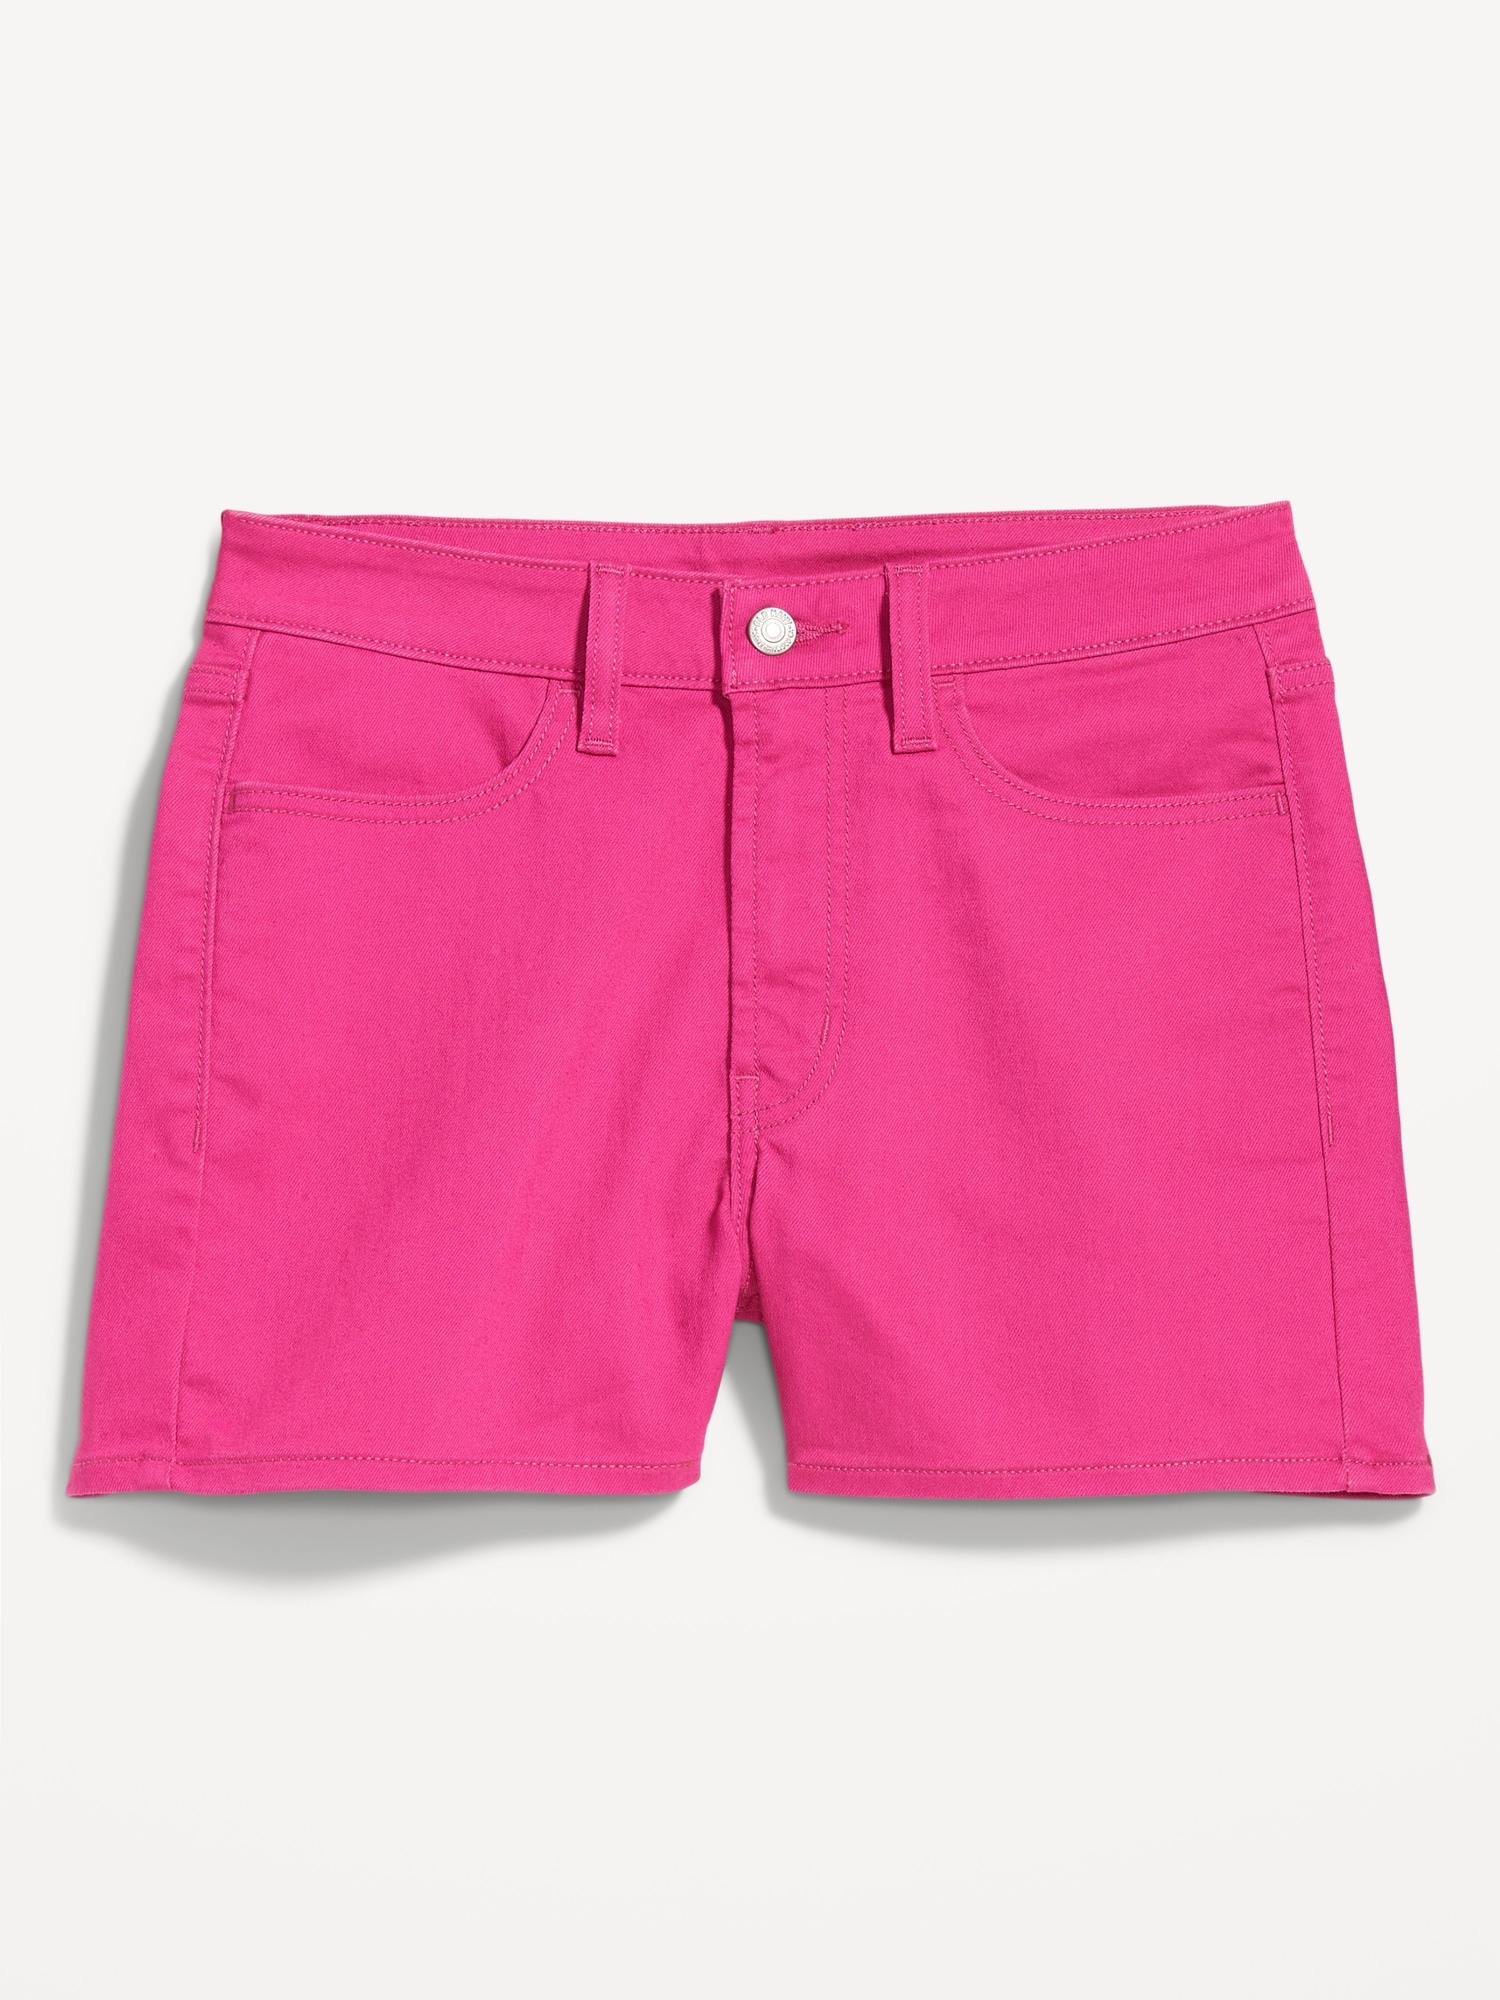 High-Waisted Wow Jean Shorts -- 3-inch inseam | Old Navy